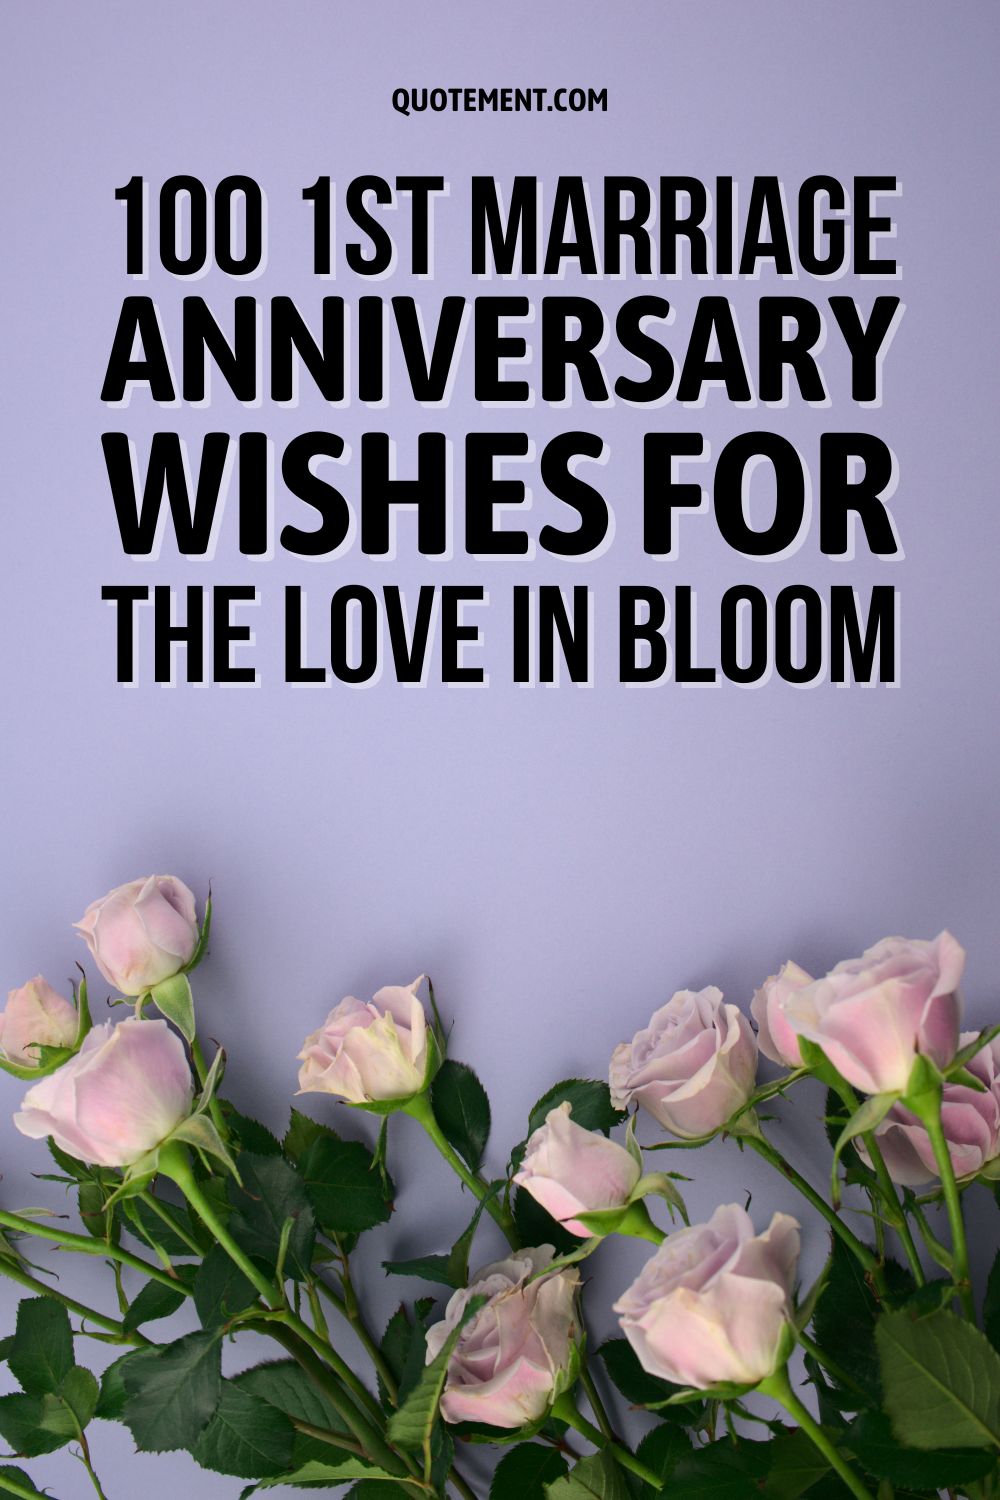 100 1st Marriage Anniversary Wishes For The Love In Bloom